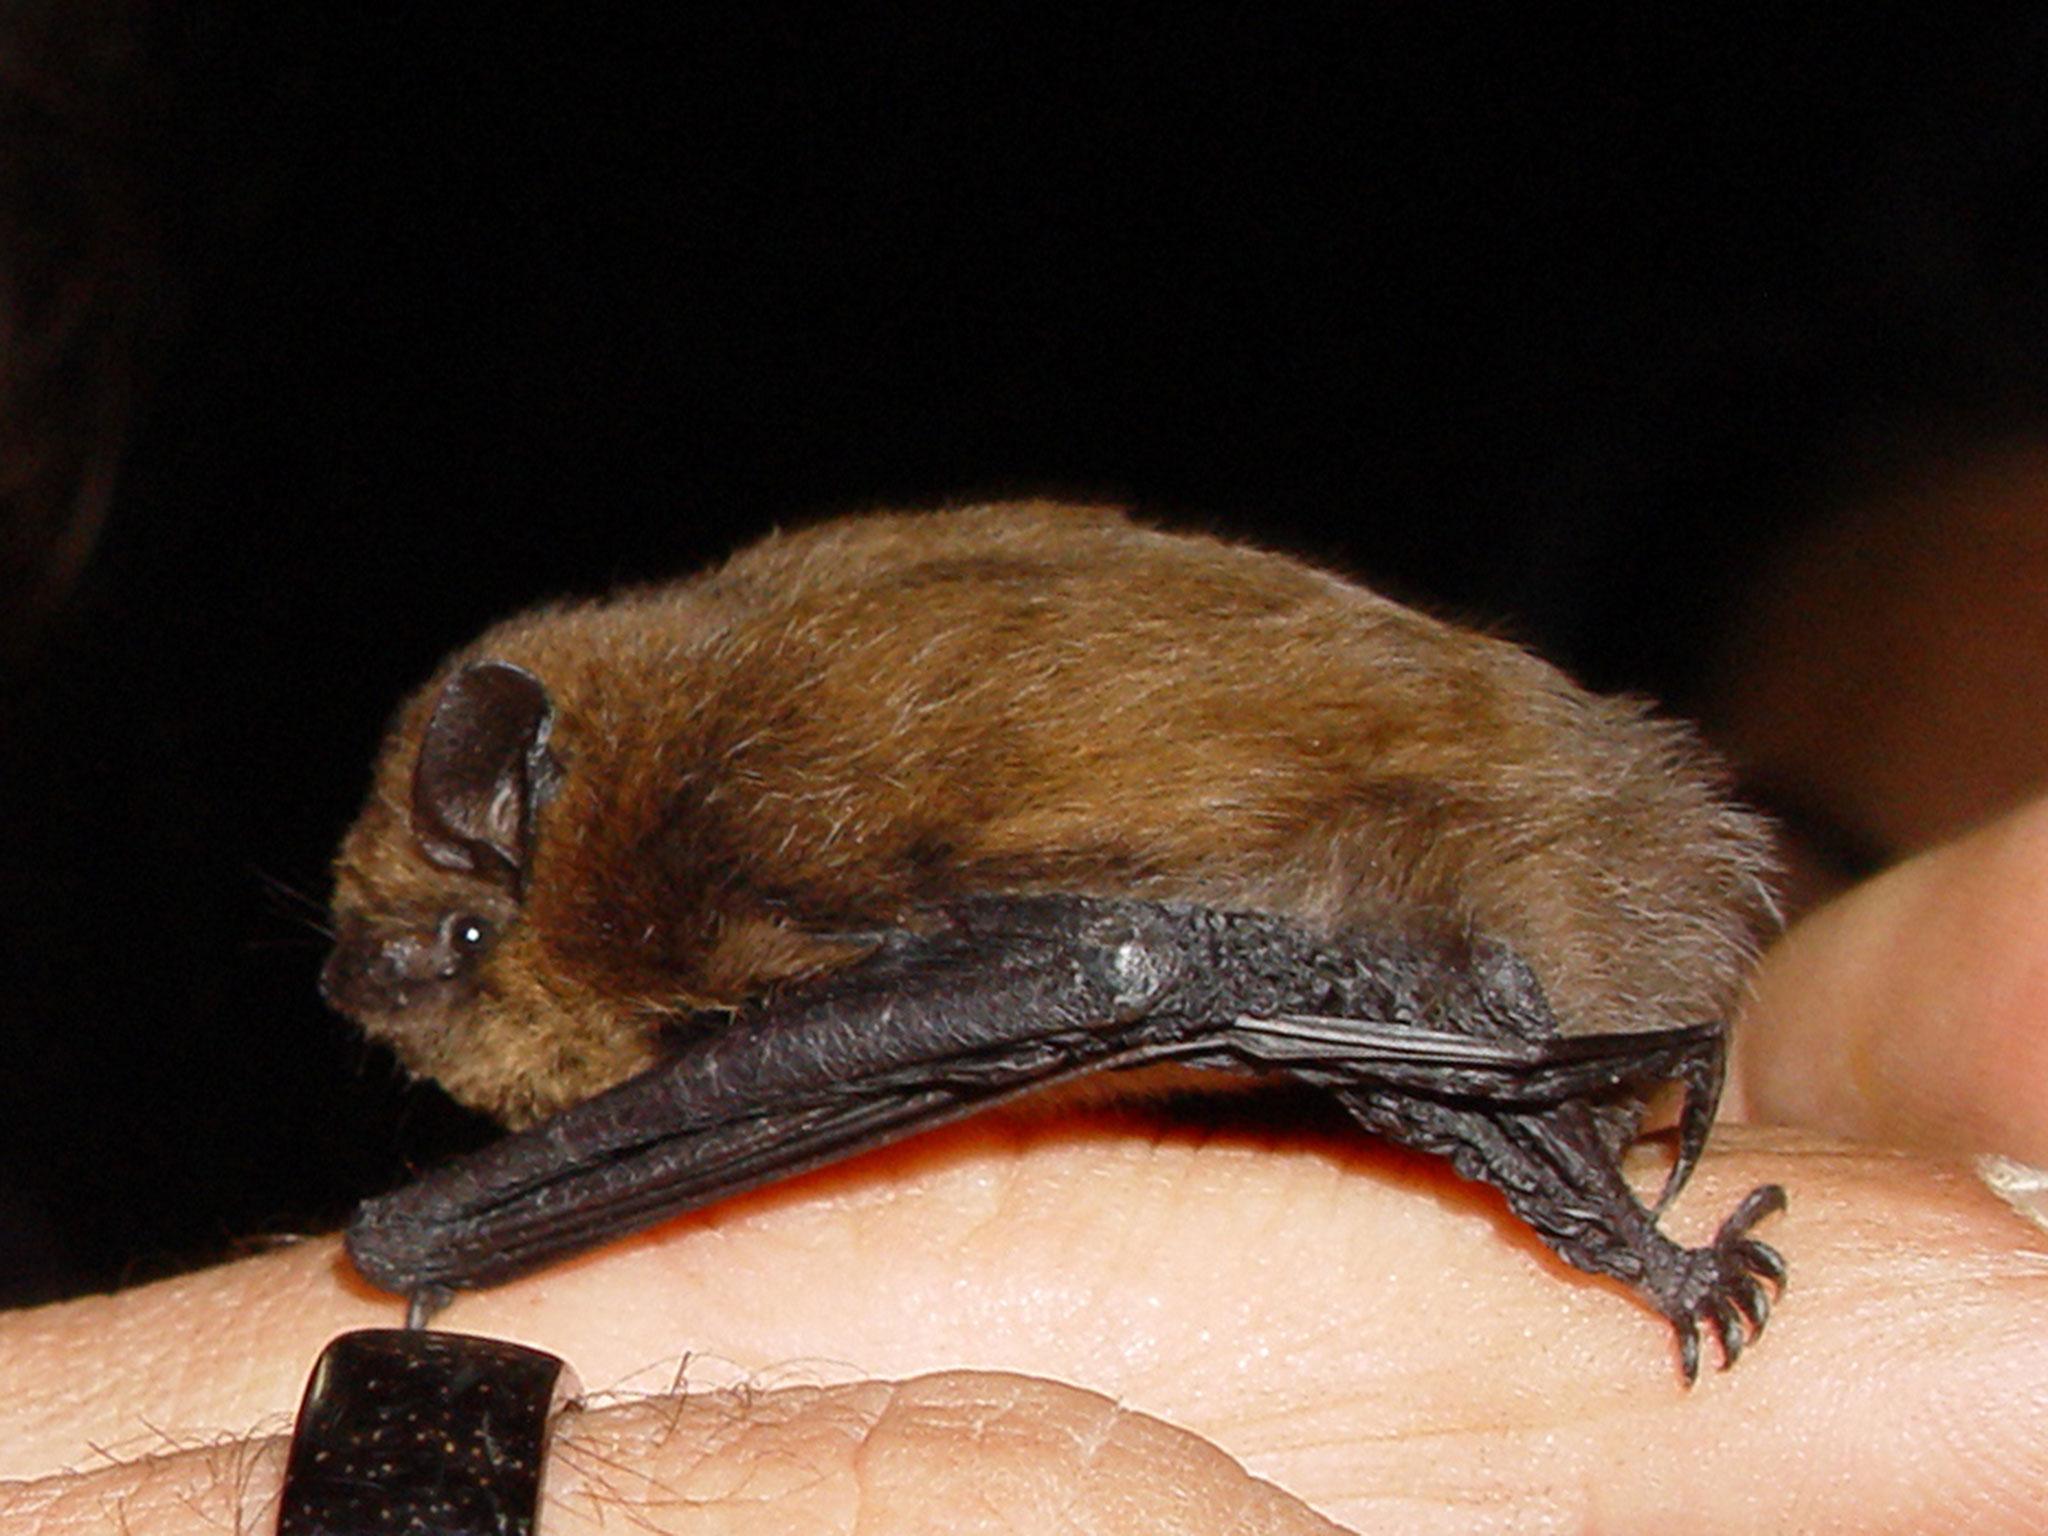 A common pipistrelle bat, similar to the creature Sehr Rafique found in her cereal